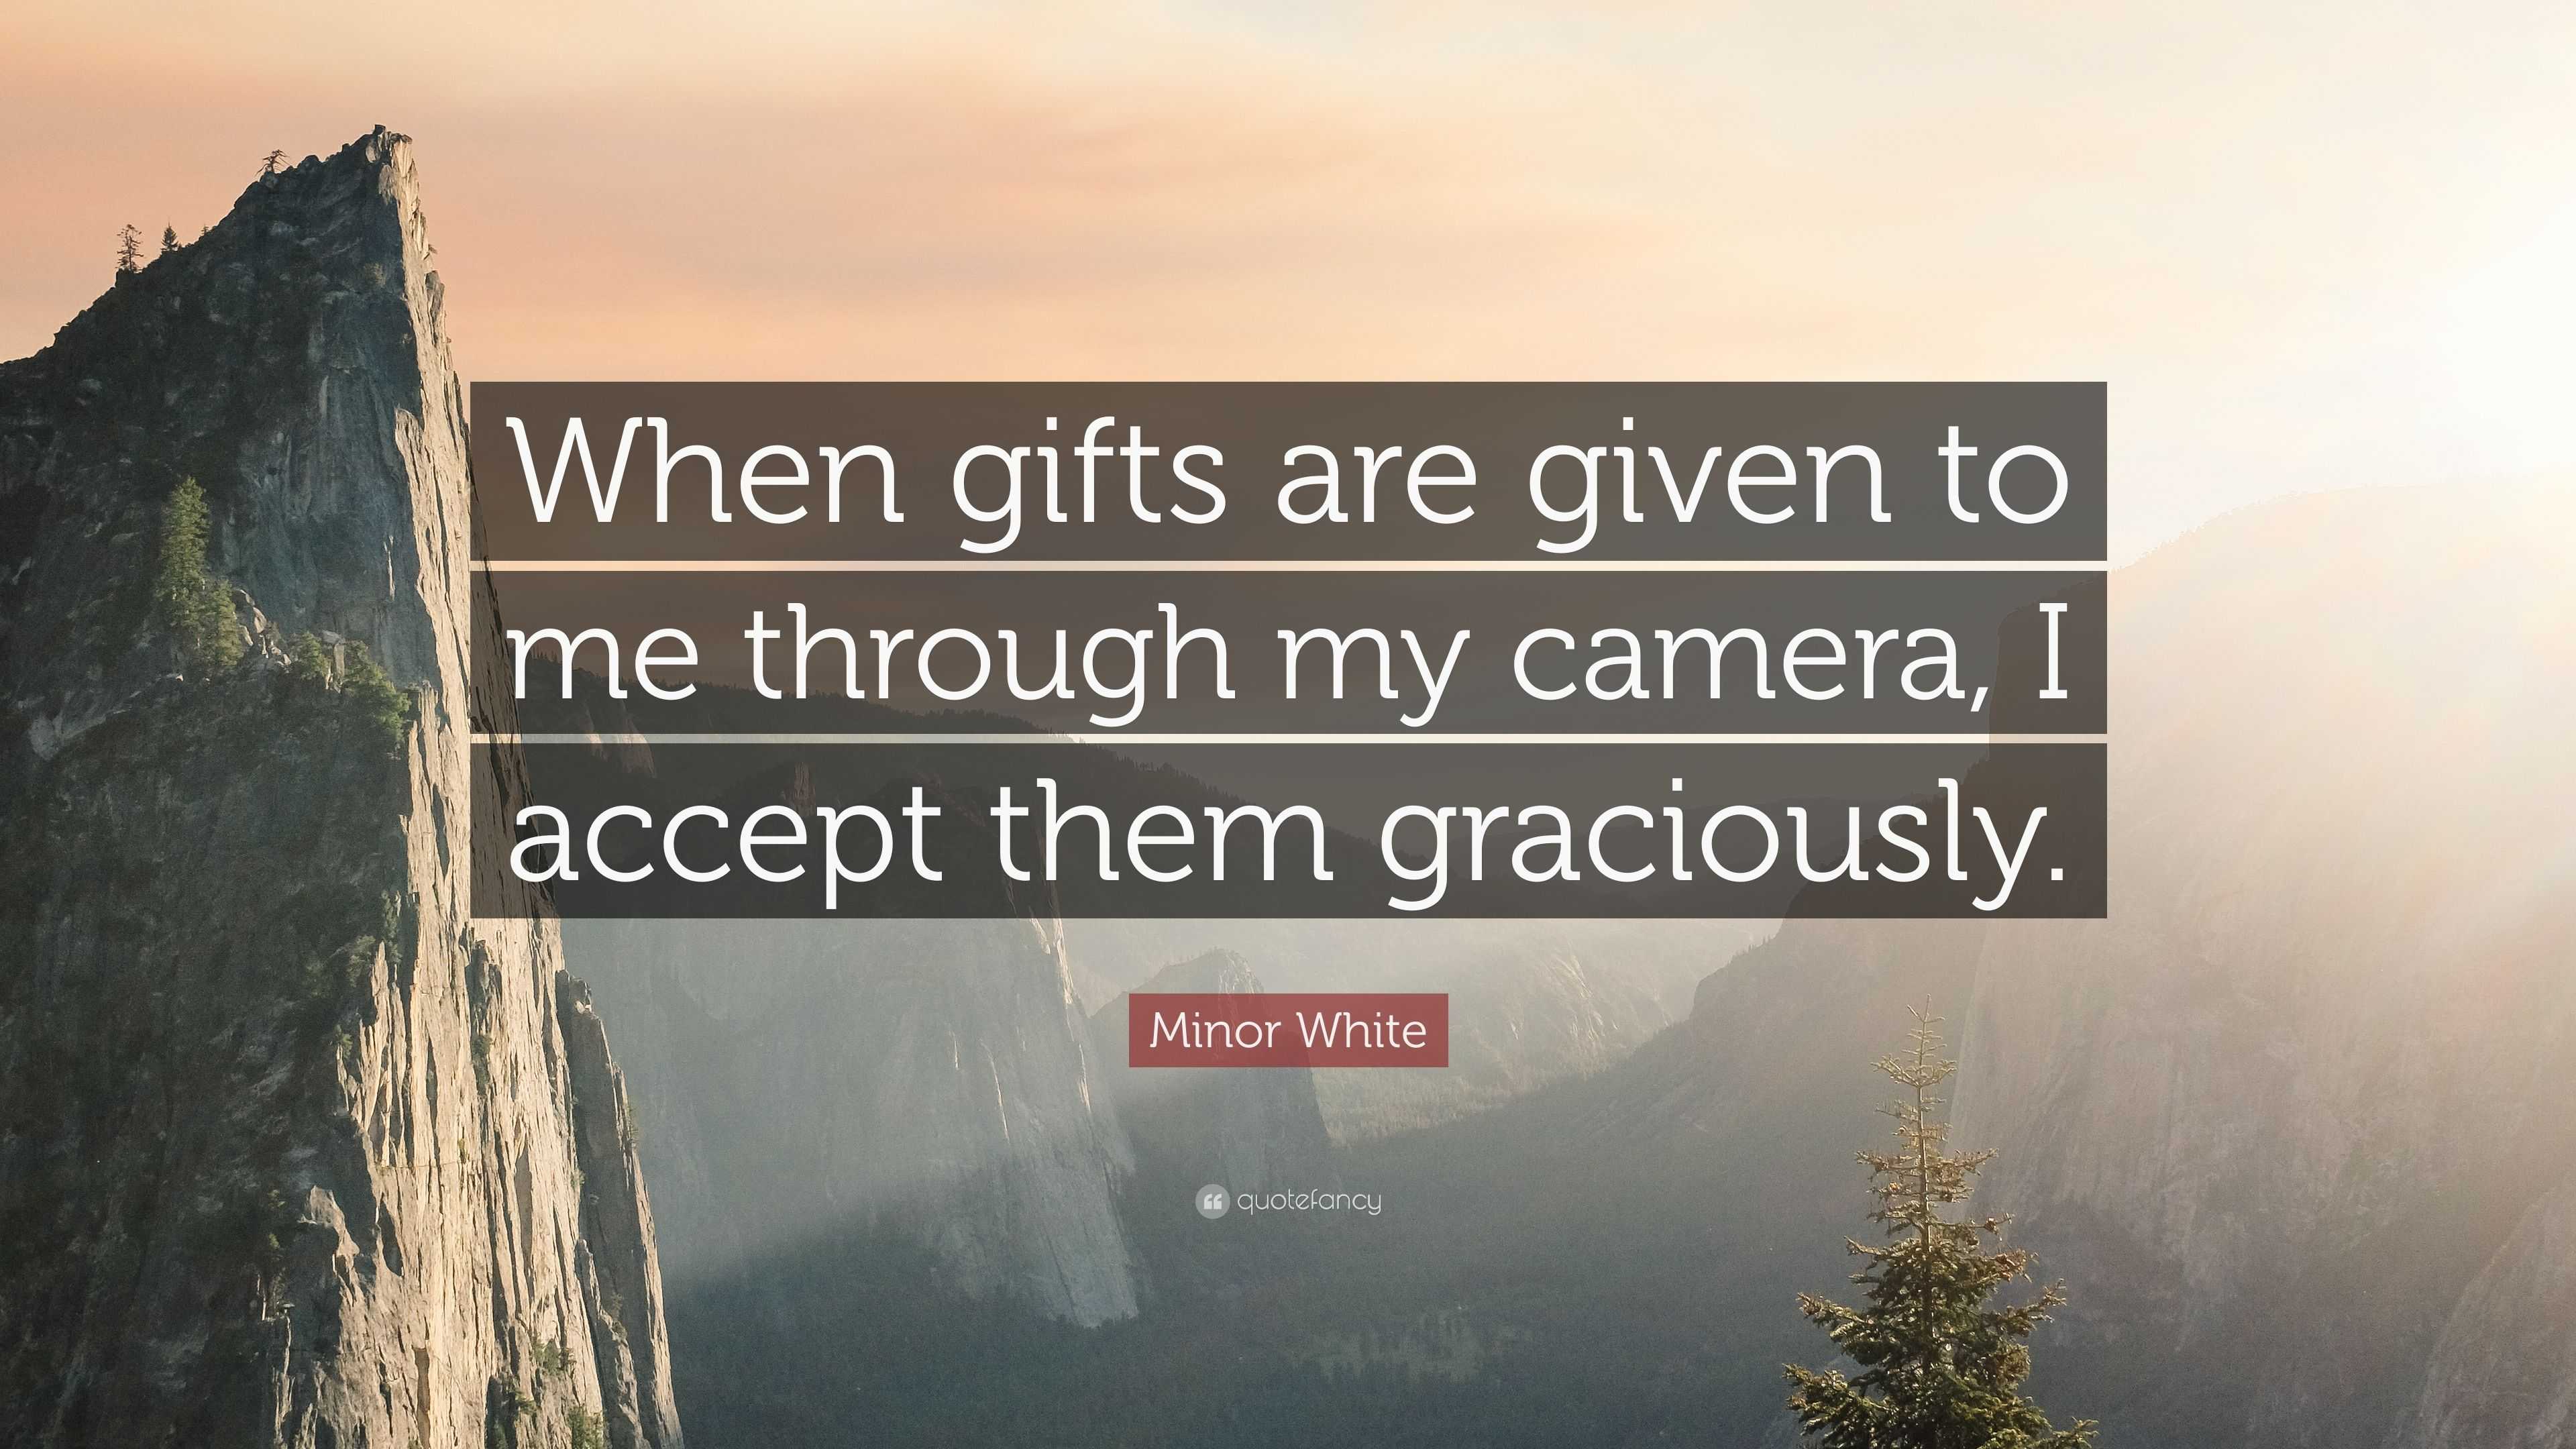 Minor White Quote: “When gifts are given to me through my camera, I accept  them graciously.”